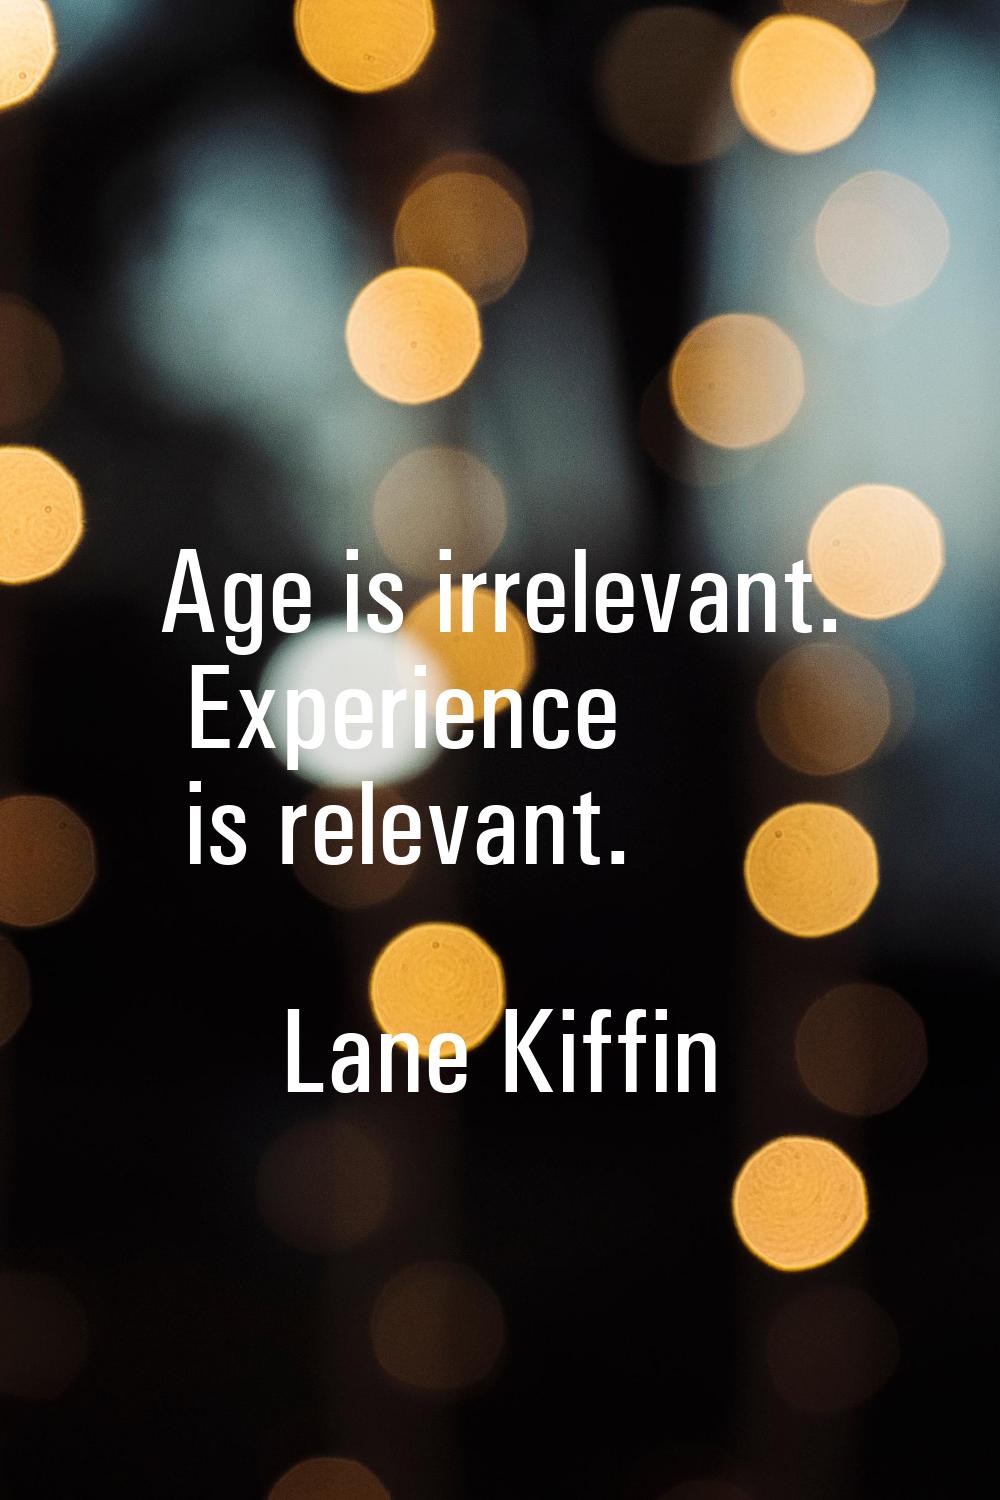 Age is irrelevant. Experience is relevant.